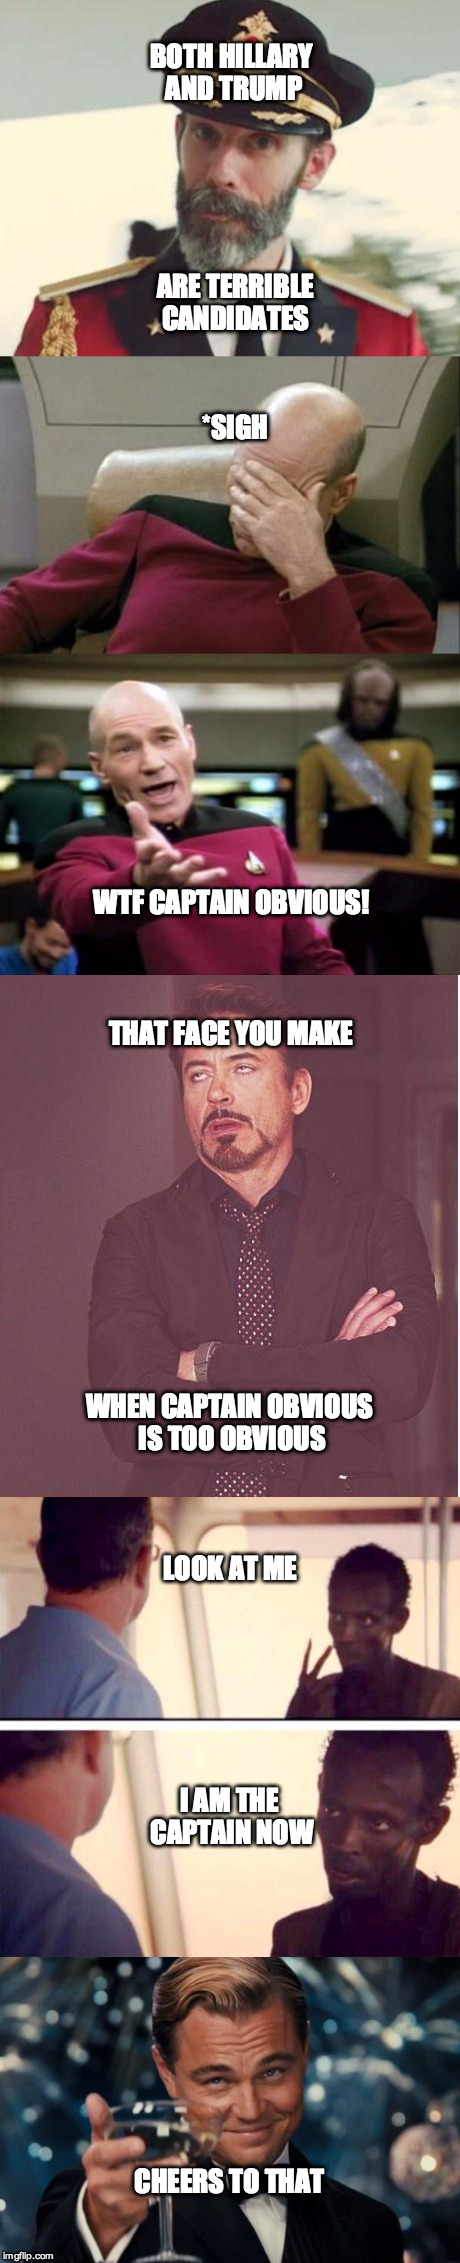 when the memes talk politics | ARE TERRIBLE CANDIDATES; BOTH HILLARY AND TRUMP; *SIGH; WTF CAPTAIN OBVIOUS! THAT FACE YOU MAKE; WHEN CAPTAIN OBVIOUS IS TOO OBVIOUS; LOOK AT ME; I AM THE CAPTAIN NOW; CHEERS TO THAT | image tagged in captain obvious,captain picard facepalm,captain phillips - i'm the captain now,captain picard,the face you make | made w/ Imgflip meme maker